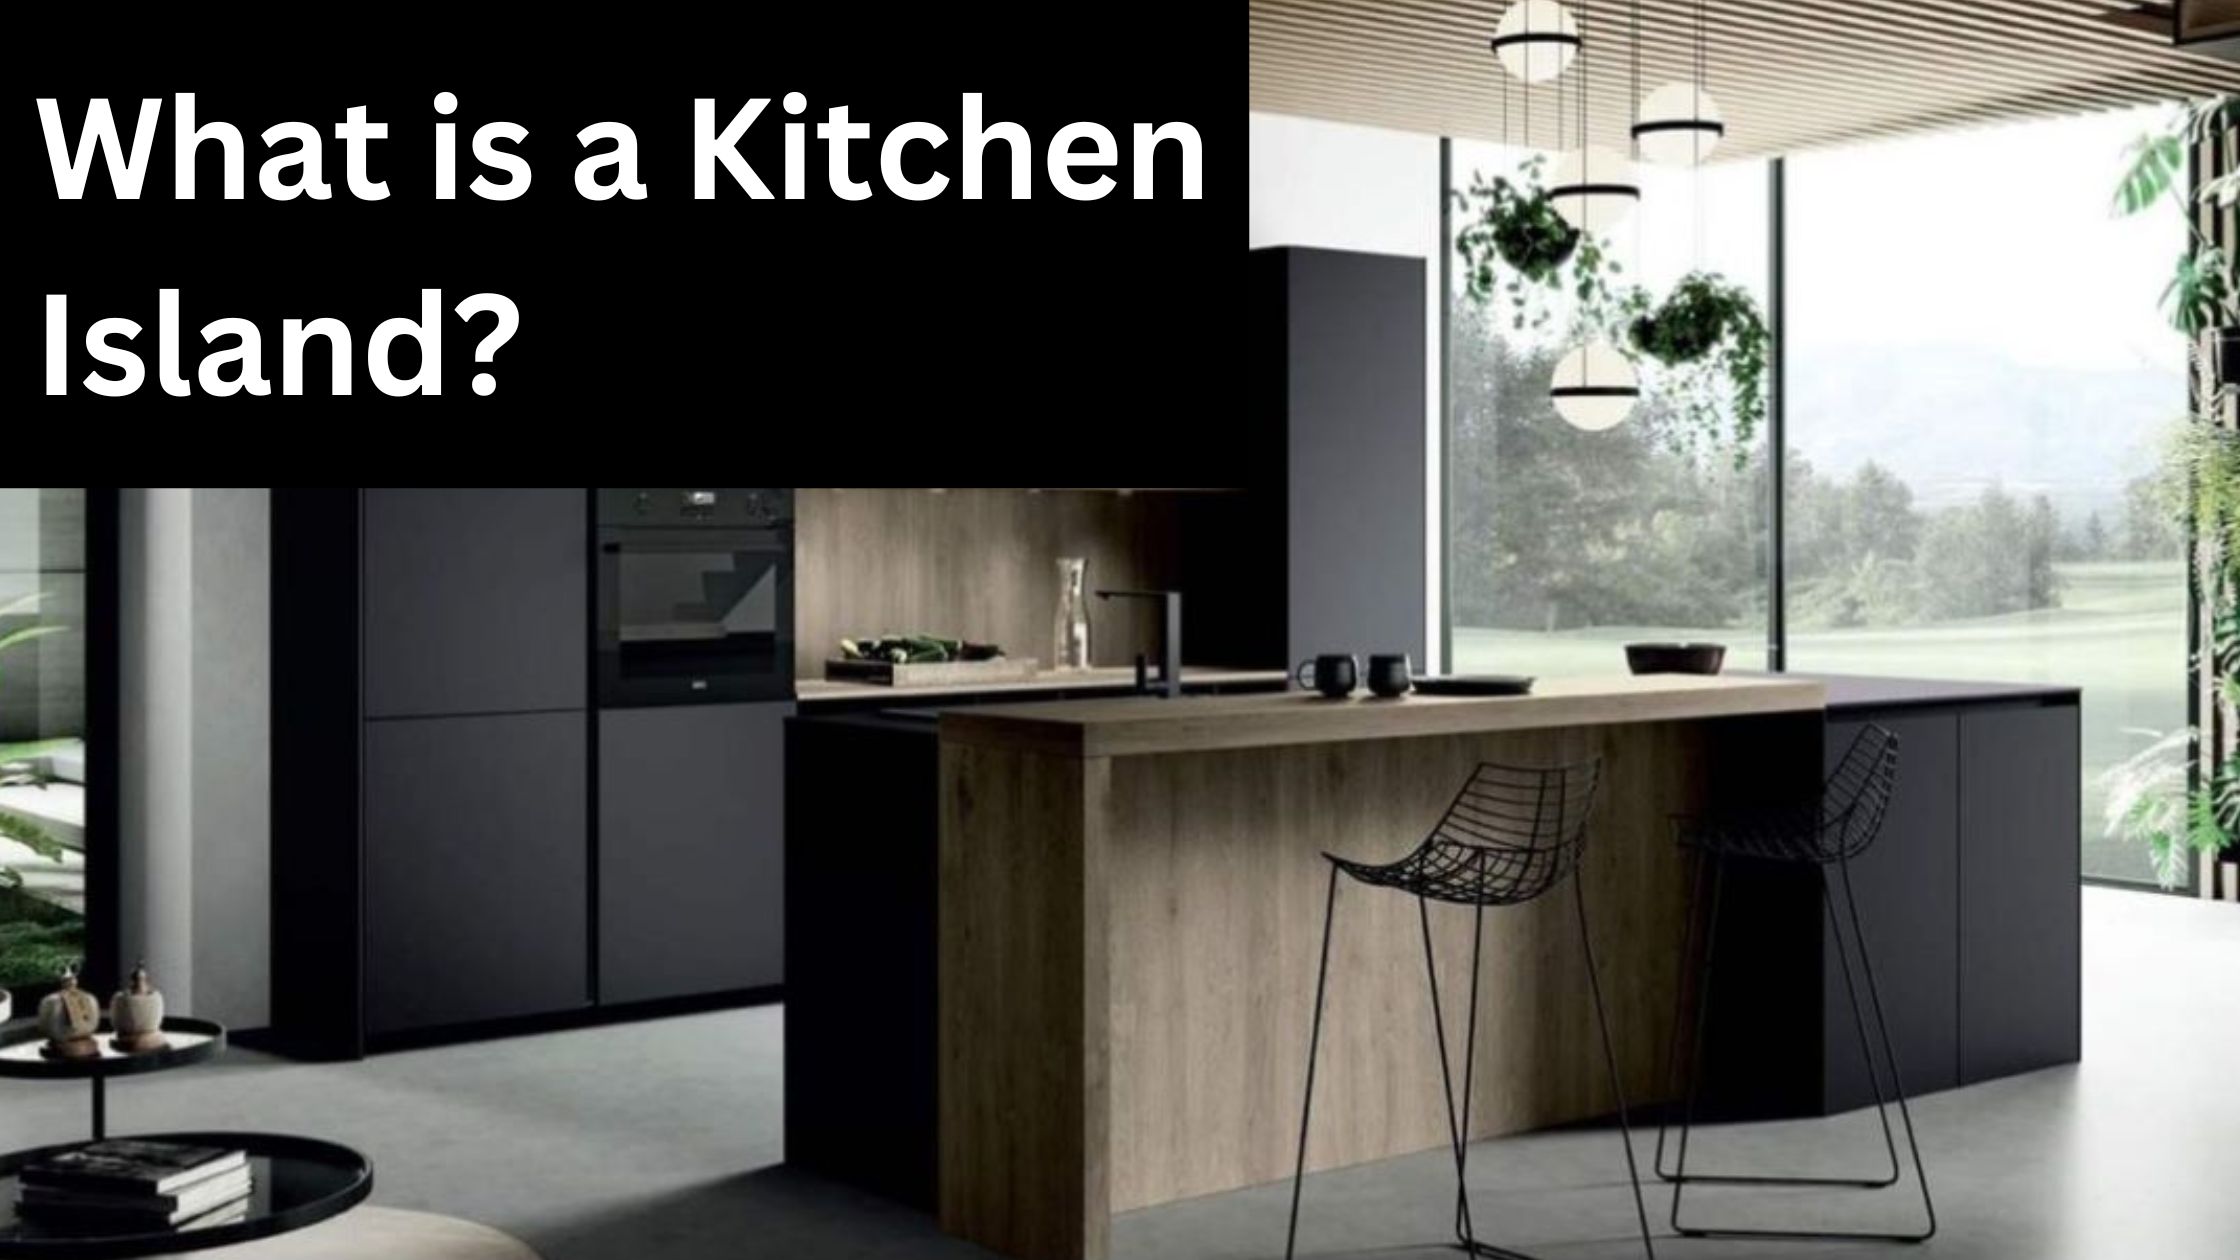 What is a Kitchen Island